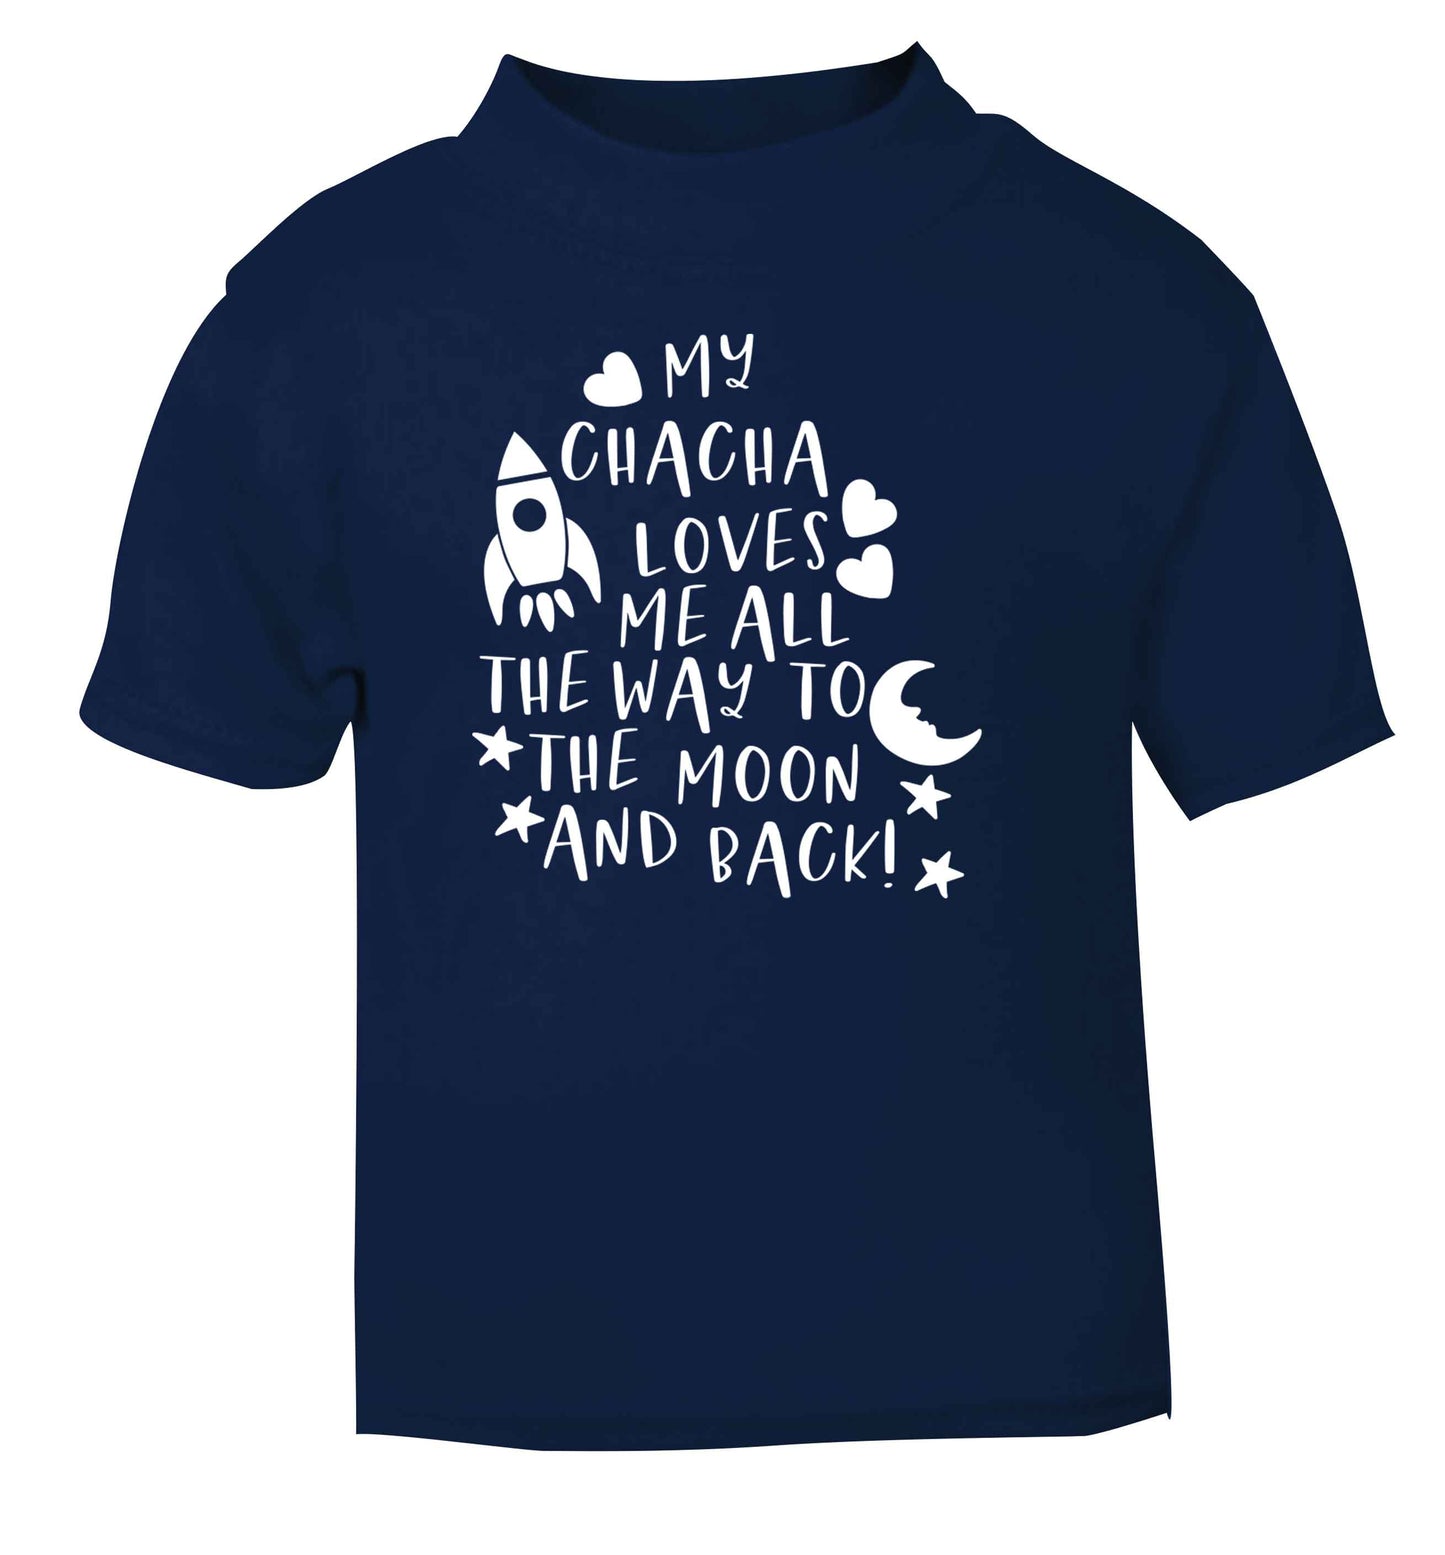 My chacha loves me all the way to the moon and back navy Baby Toddler Tshirt 2 Years